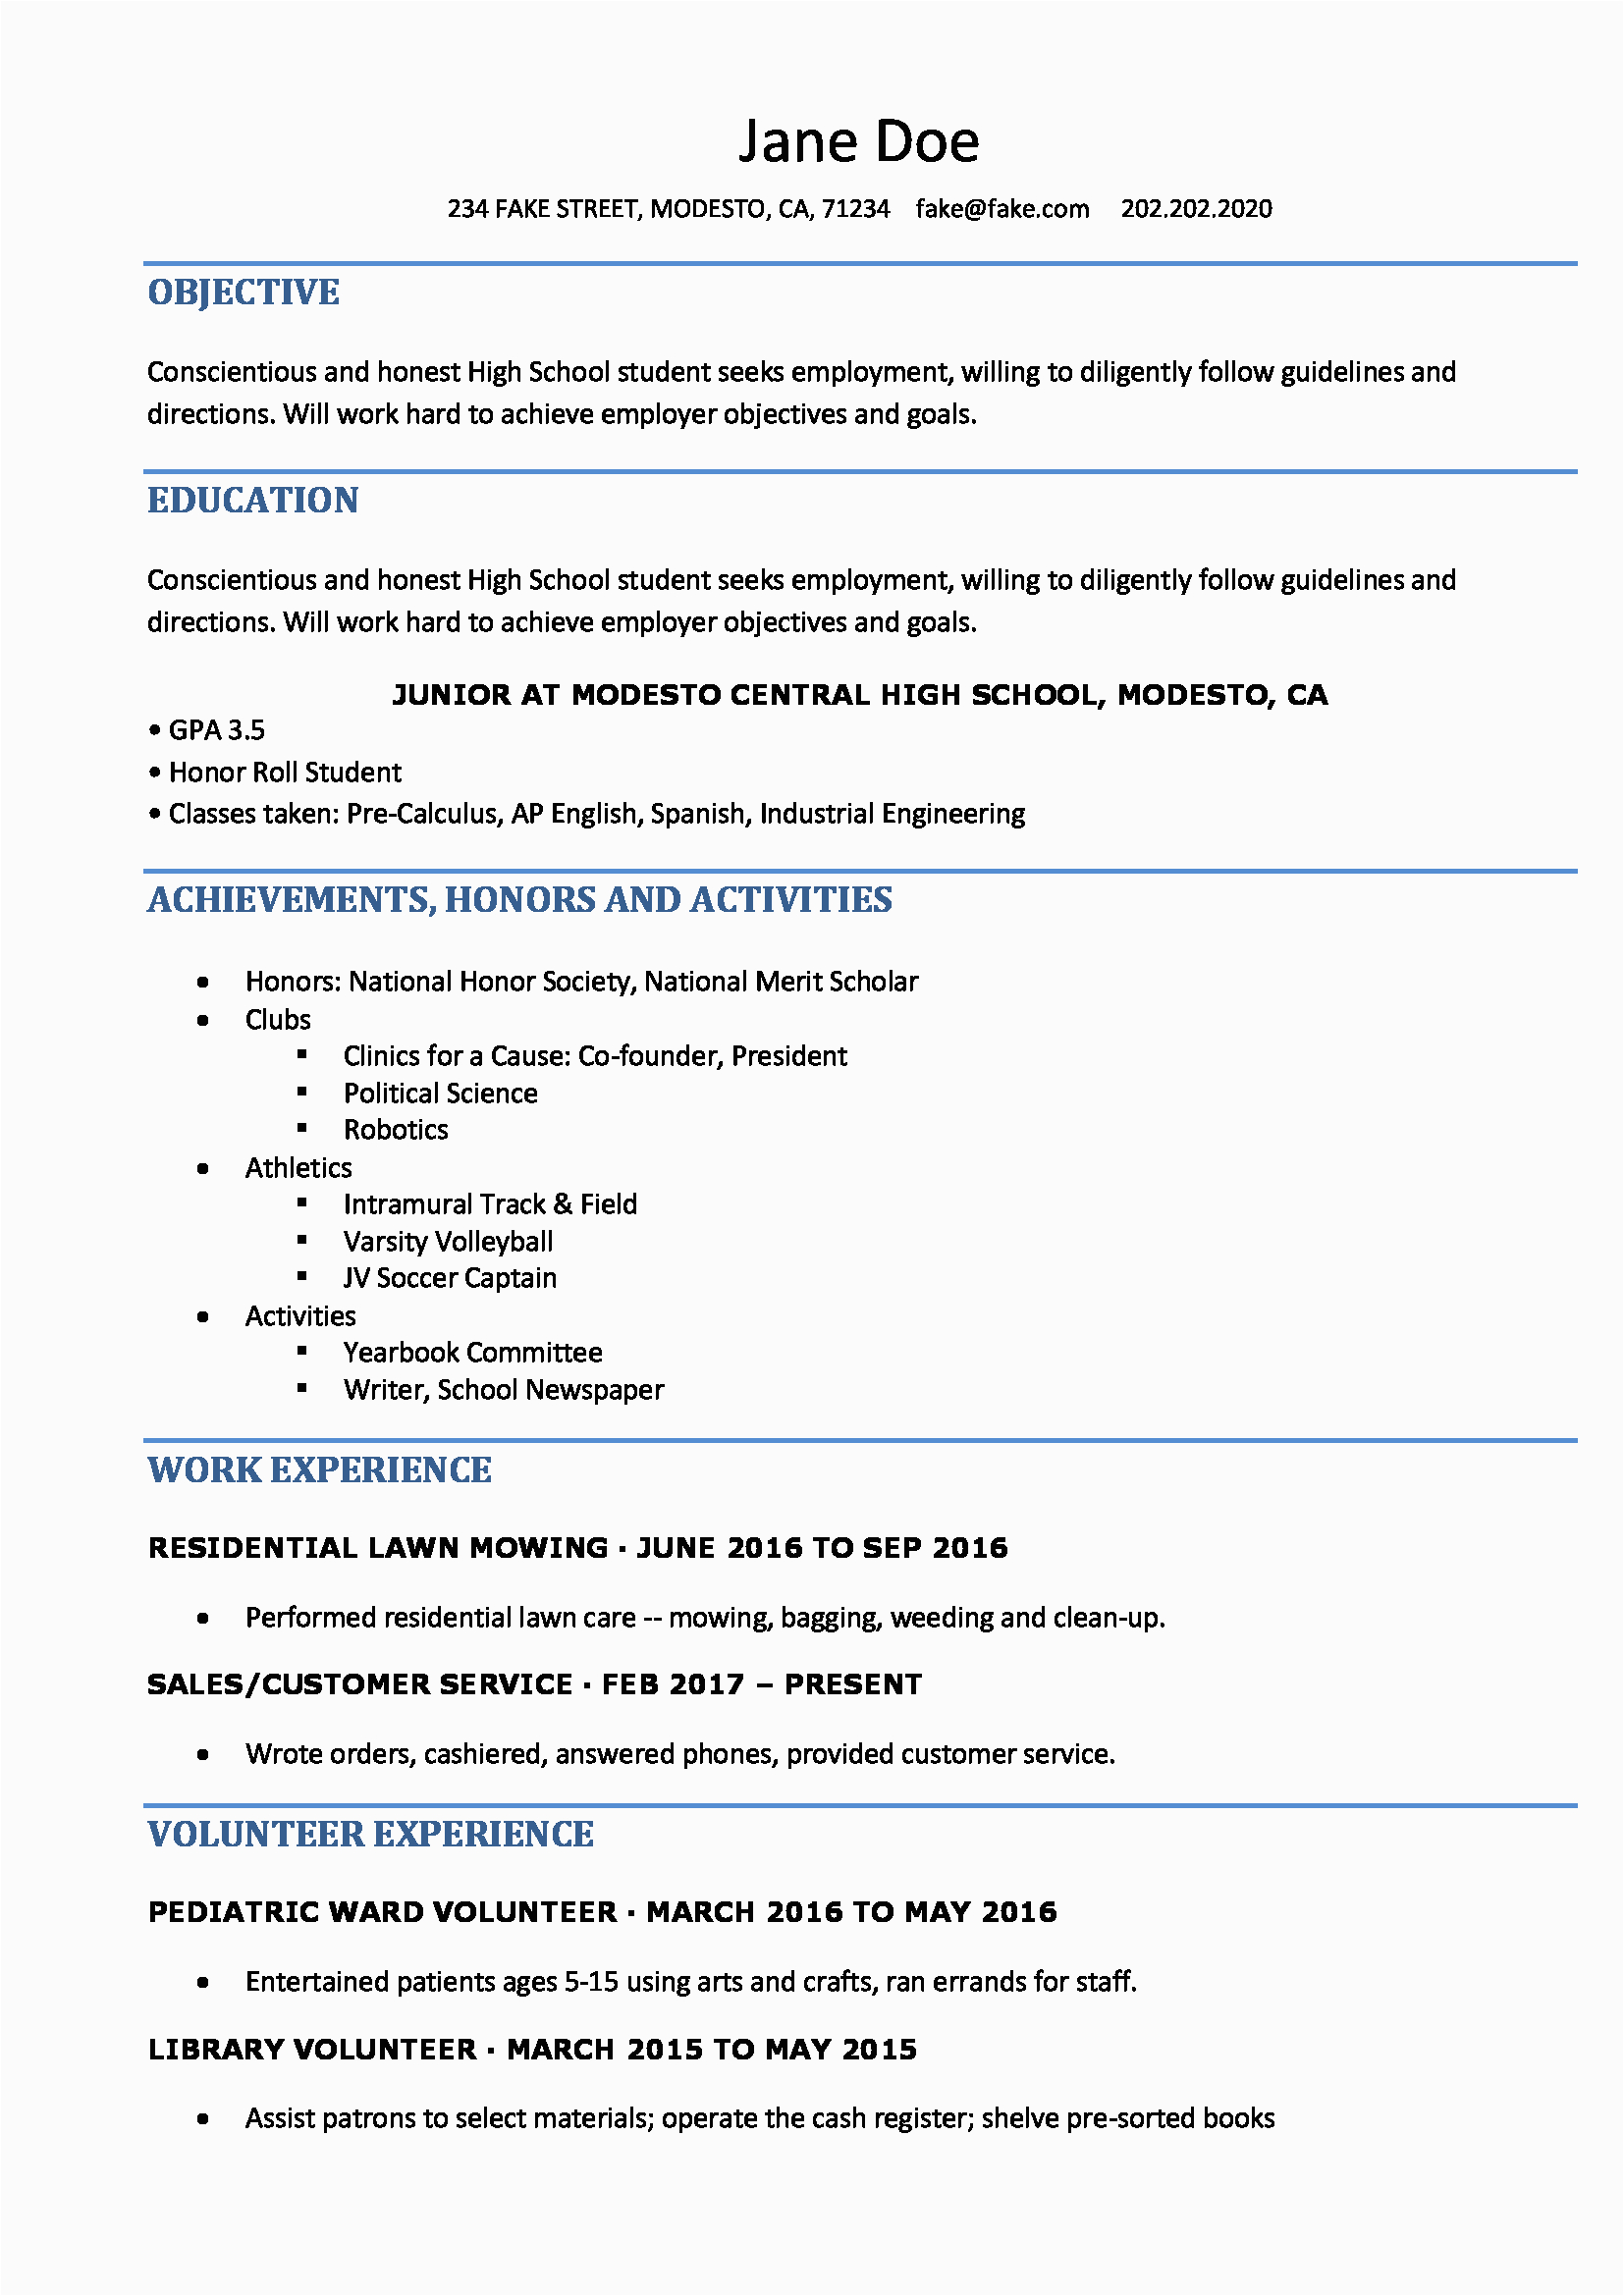 Resume Objective Samples for High School Students High School Resume Resume Templates for High School